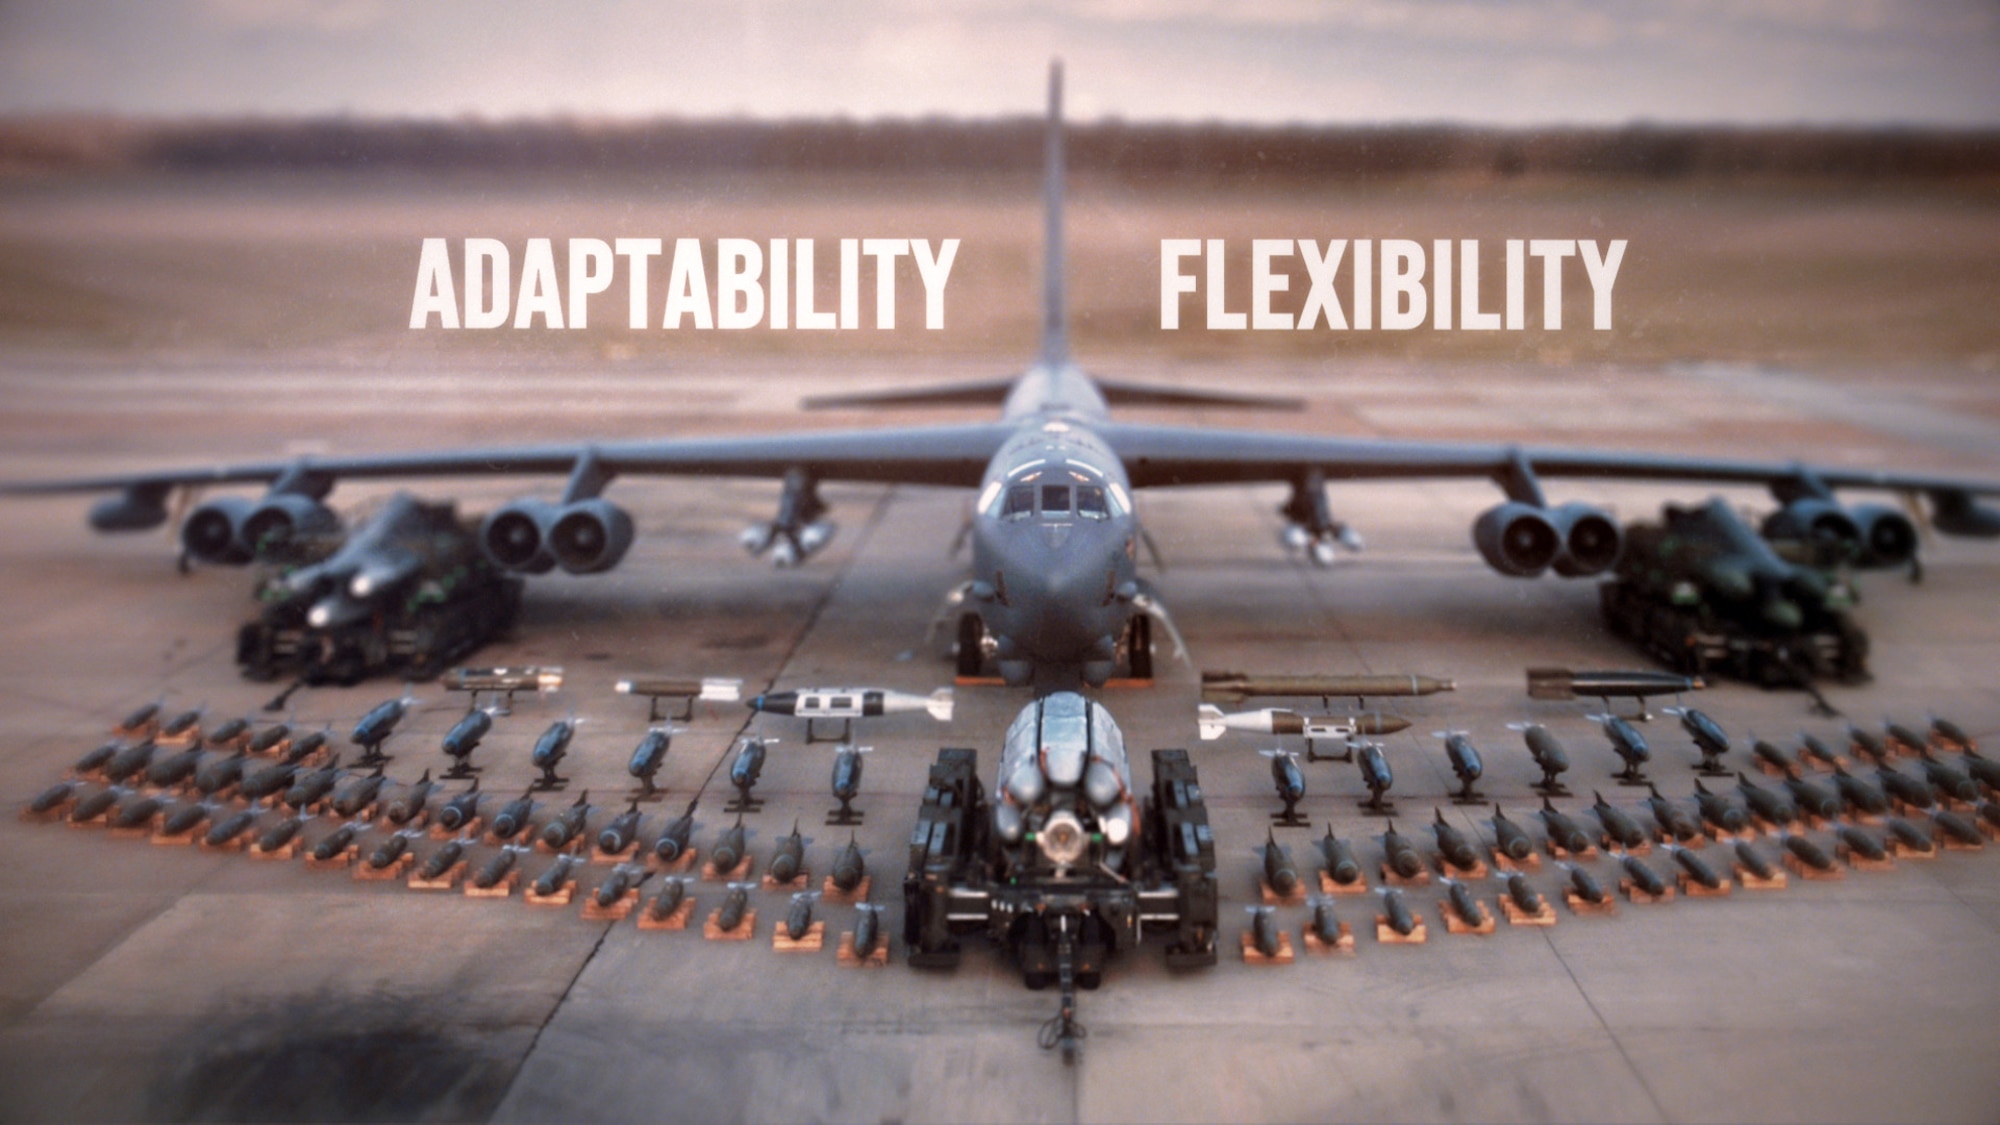 Adaptability, flexibility and the ability to perform the widest variety of missions of any bomber platform in the fleet, makes the B-52 Stratofortress a key component of global strike capability and nuclear deterrence now and in the future.